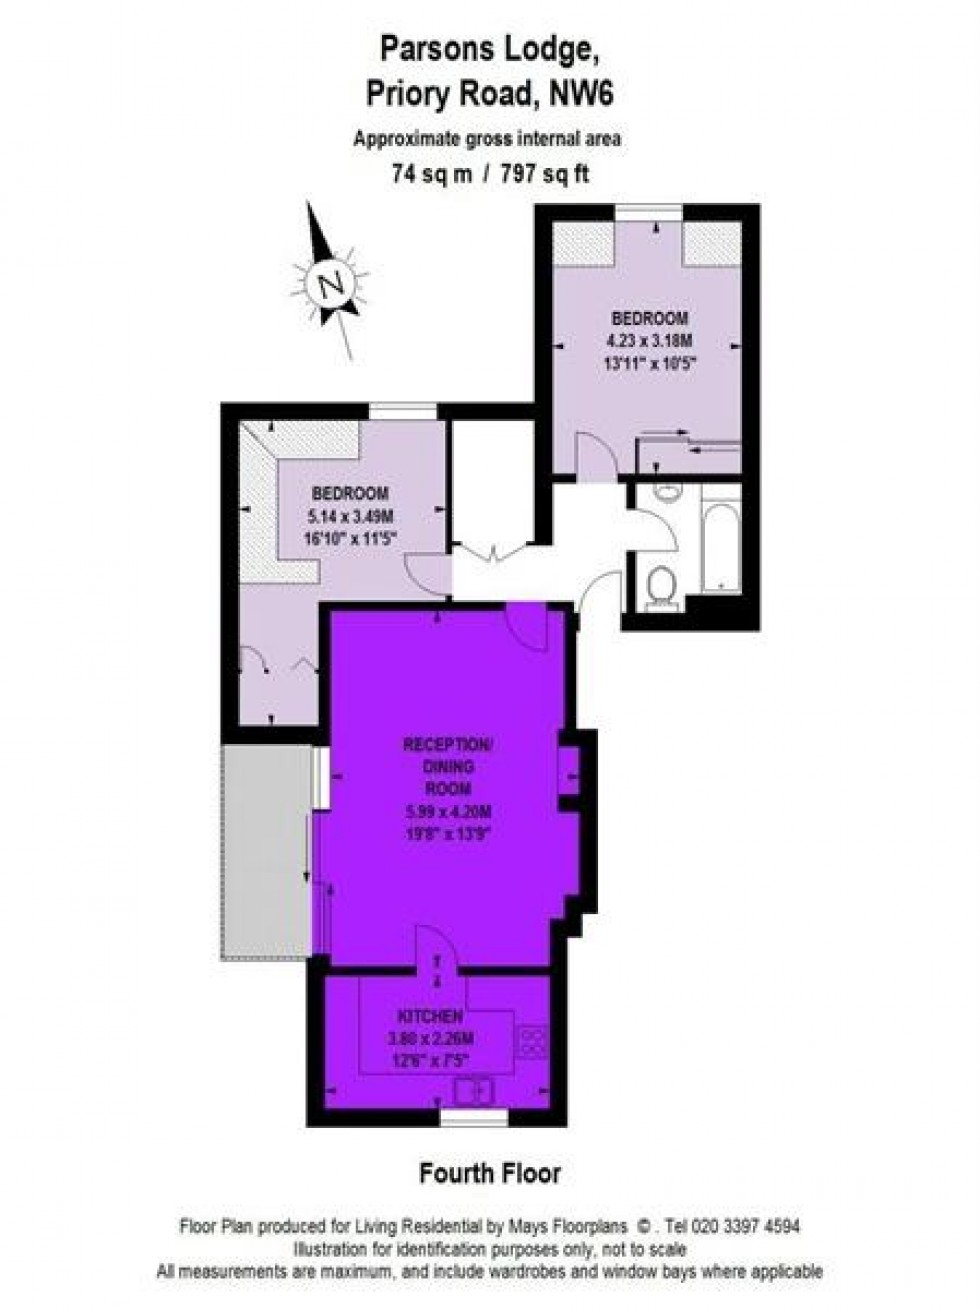 Floorplan for Parsons Lodge, Priory Road, West Hampstead